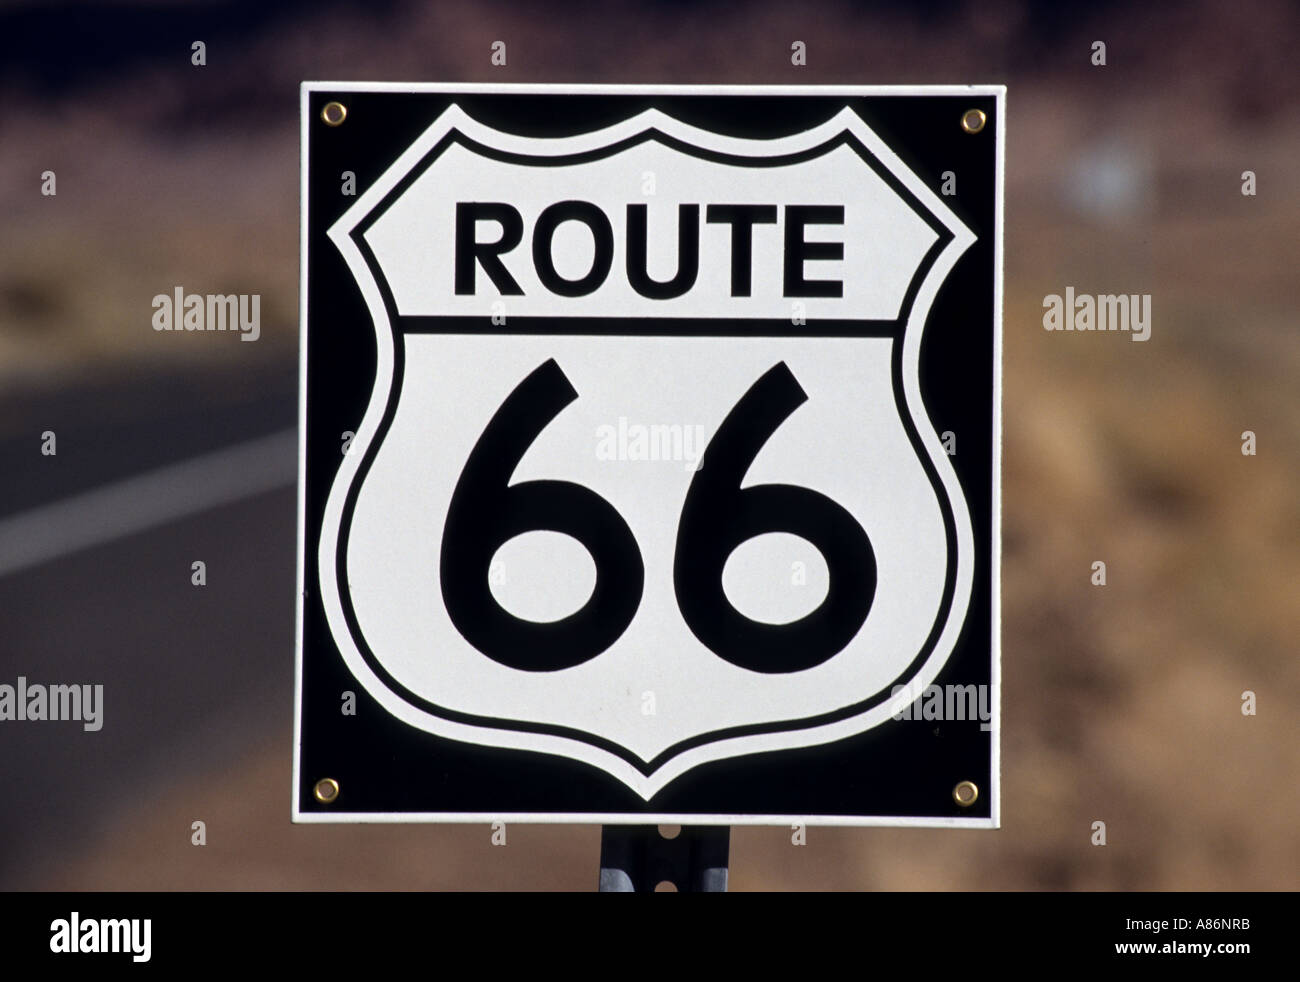 Route 66 United States America road traffic sign Banque D'Images